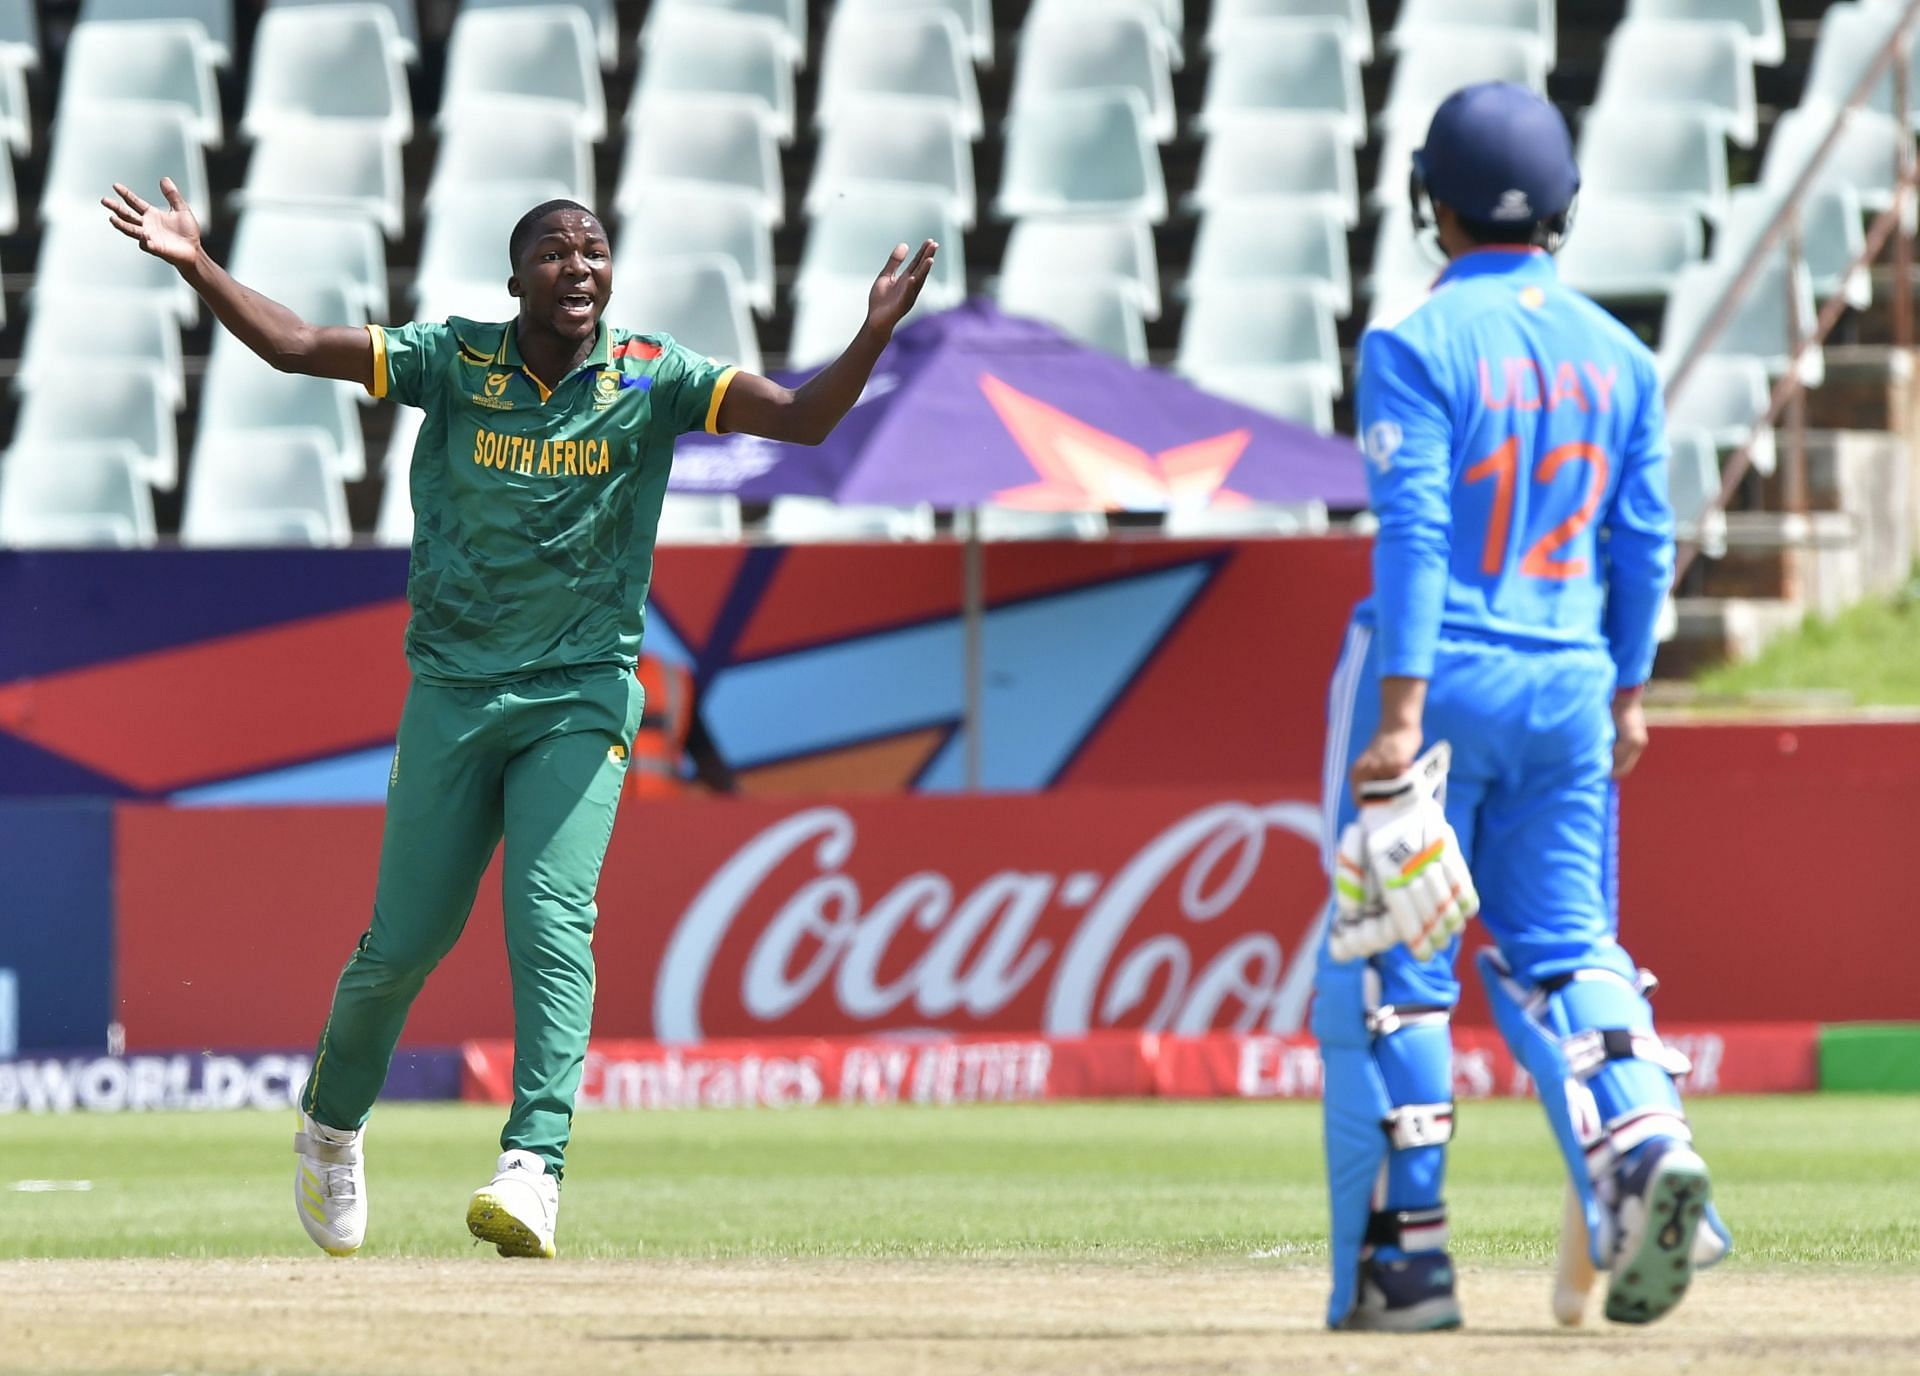 South Africa’s Kwena Maphaka named 2024 U19 Cricket World Cup Player of the Tournament